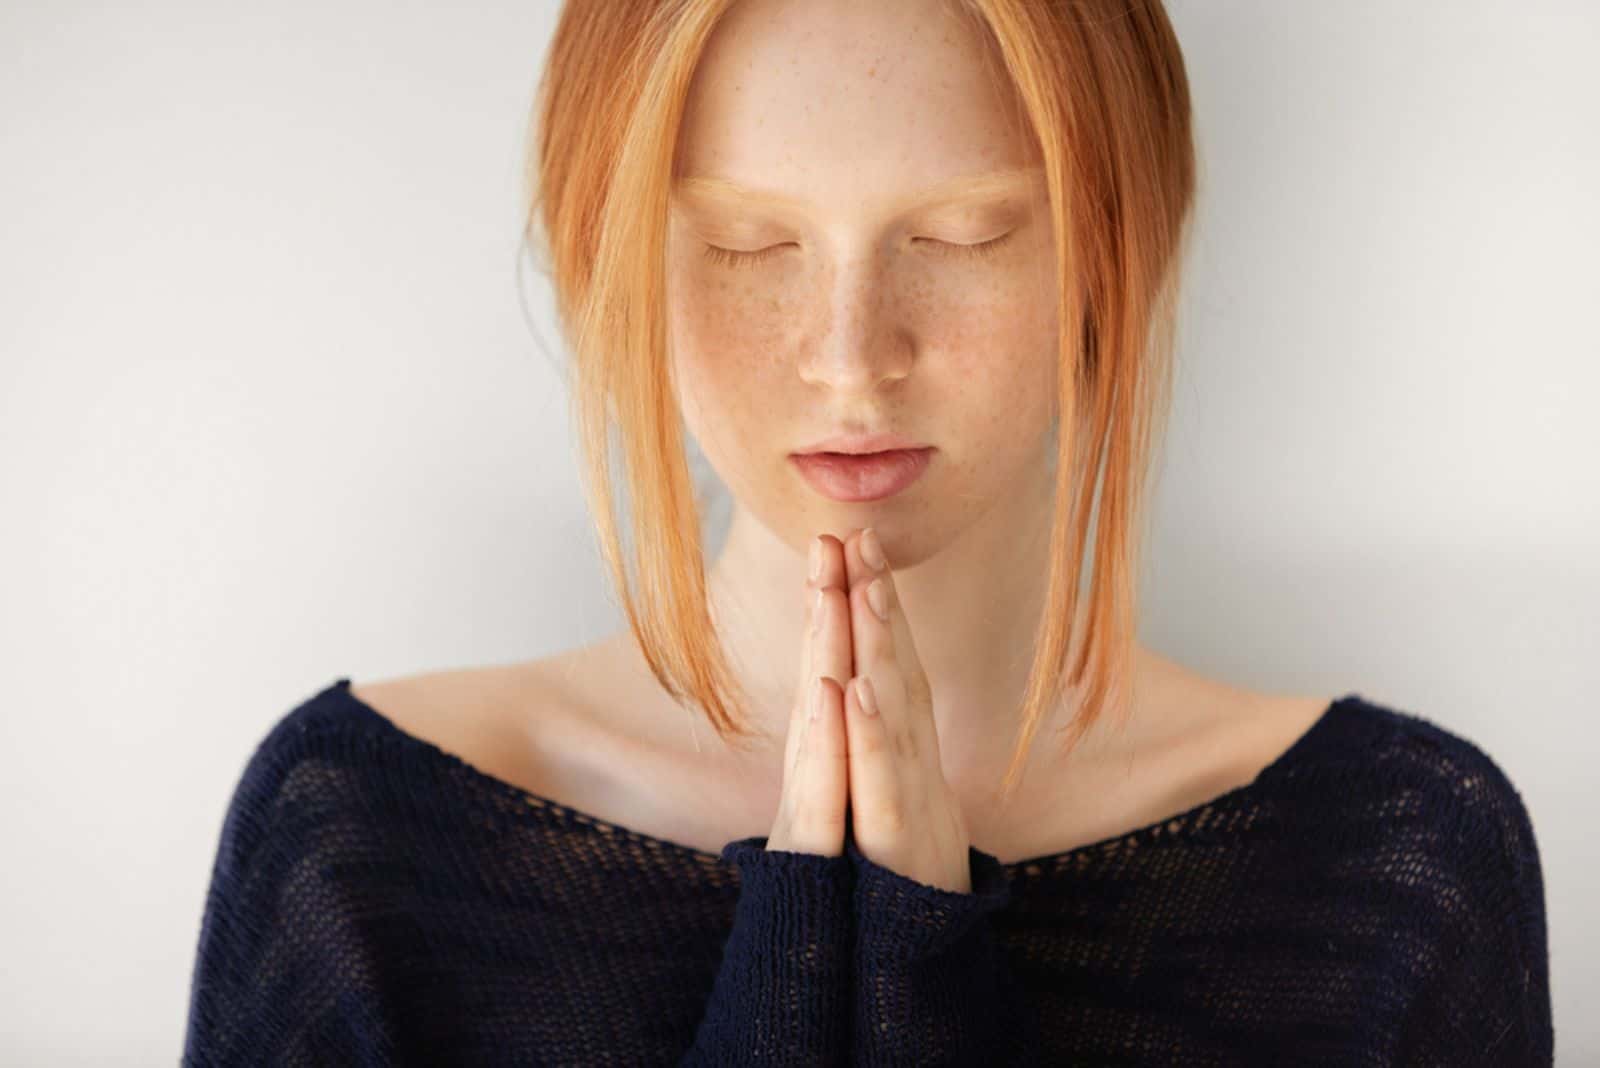 young woman with red hair praying